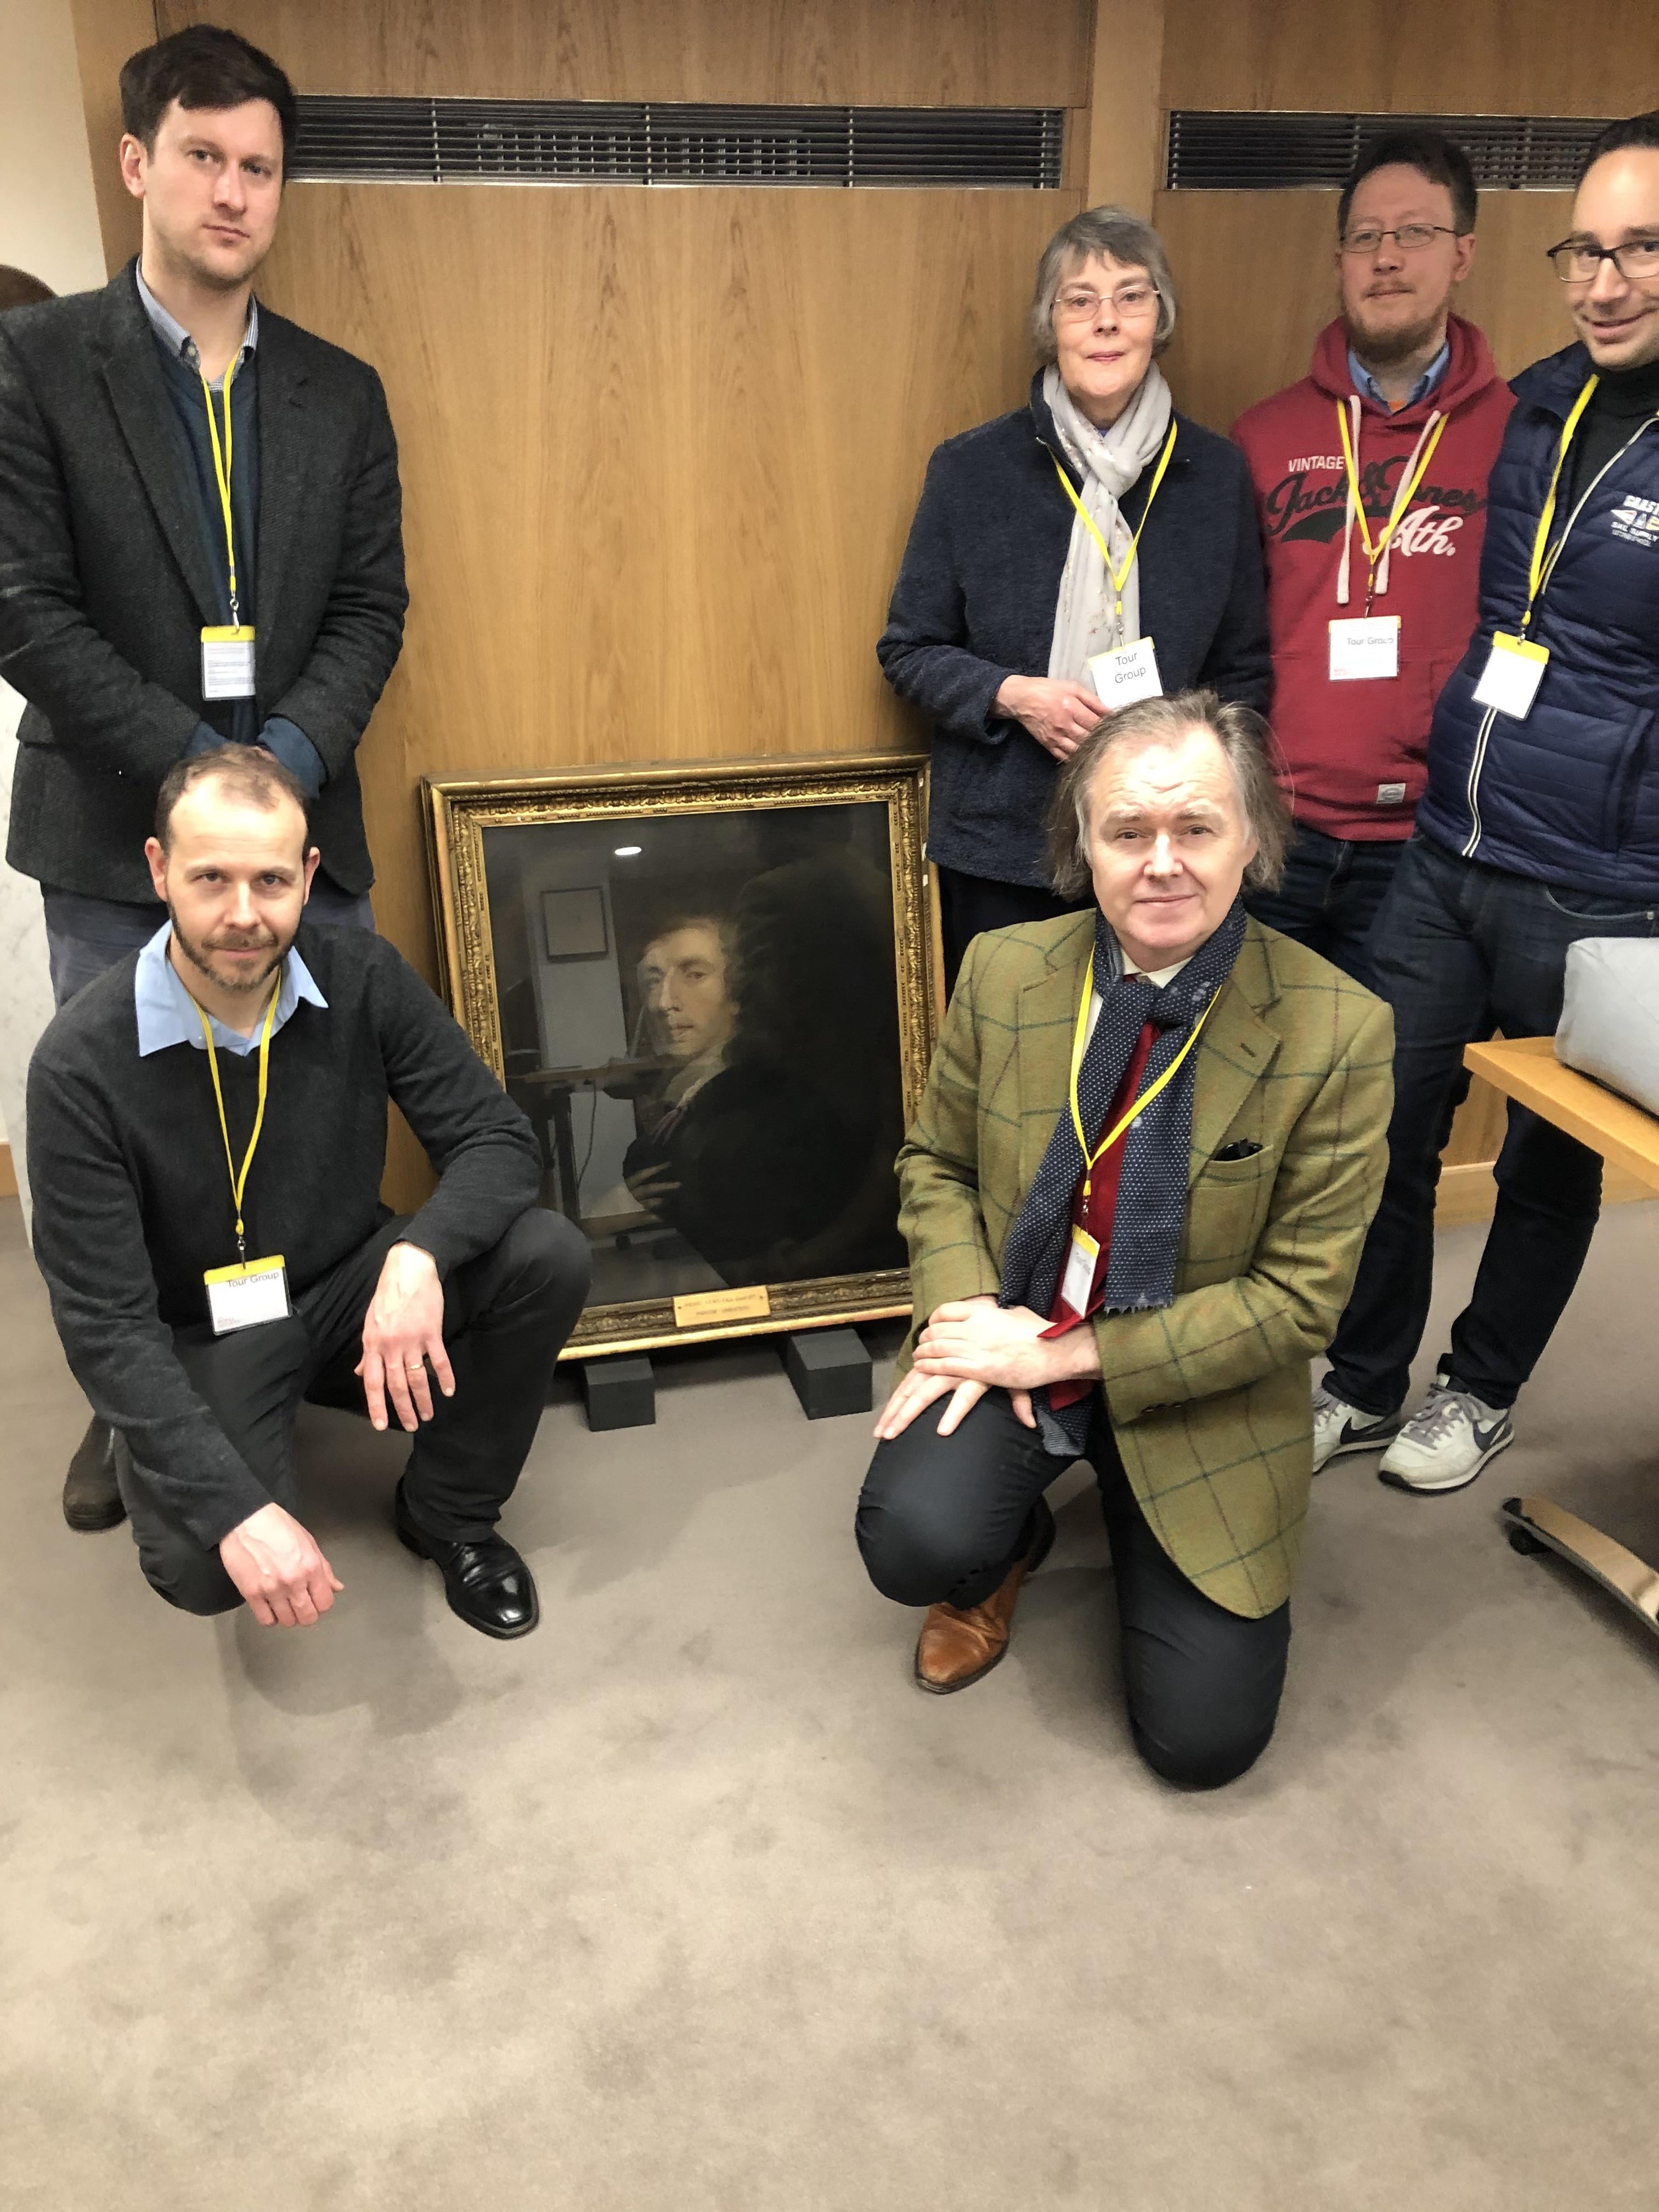 CCSP at the Royal Society to View Newly Identified Portrait of Henry More